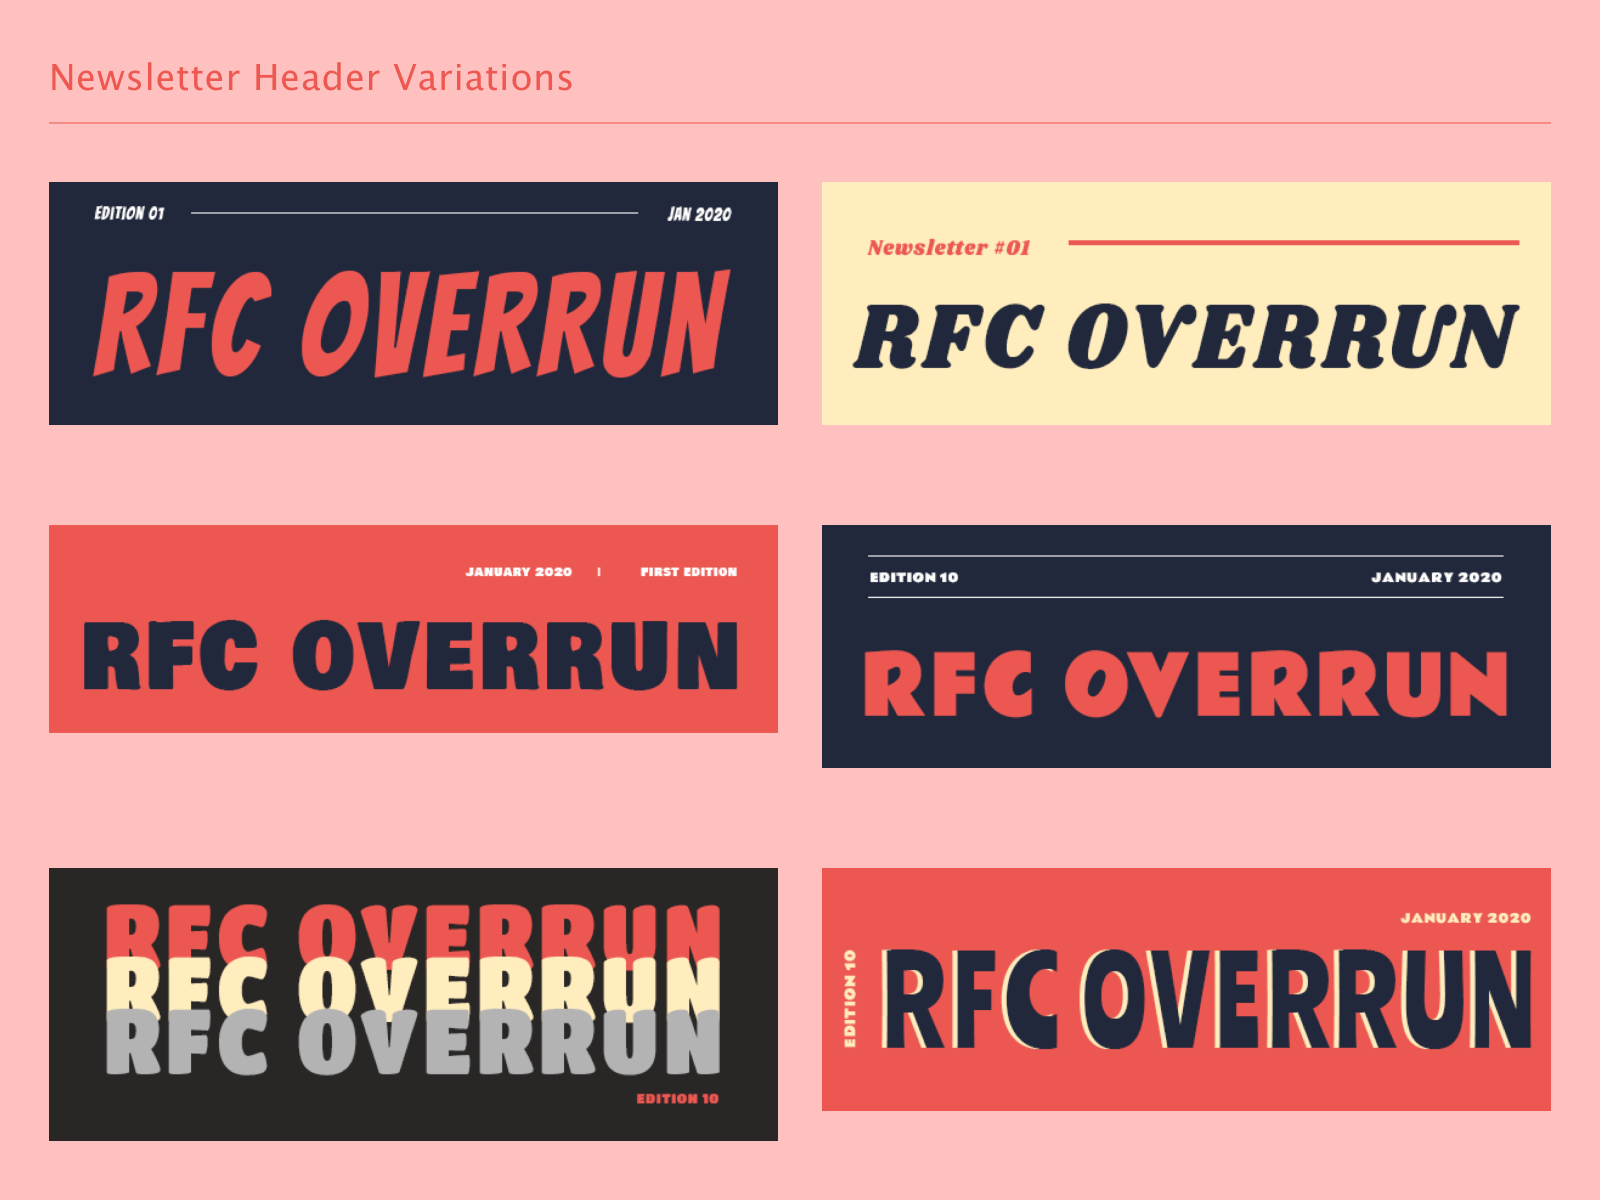 Run For Cover Records Newsletter Header Variations By Keeley Laures On Dribbble